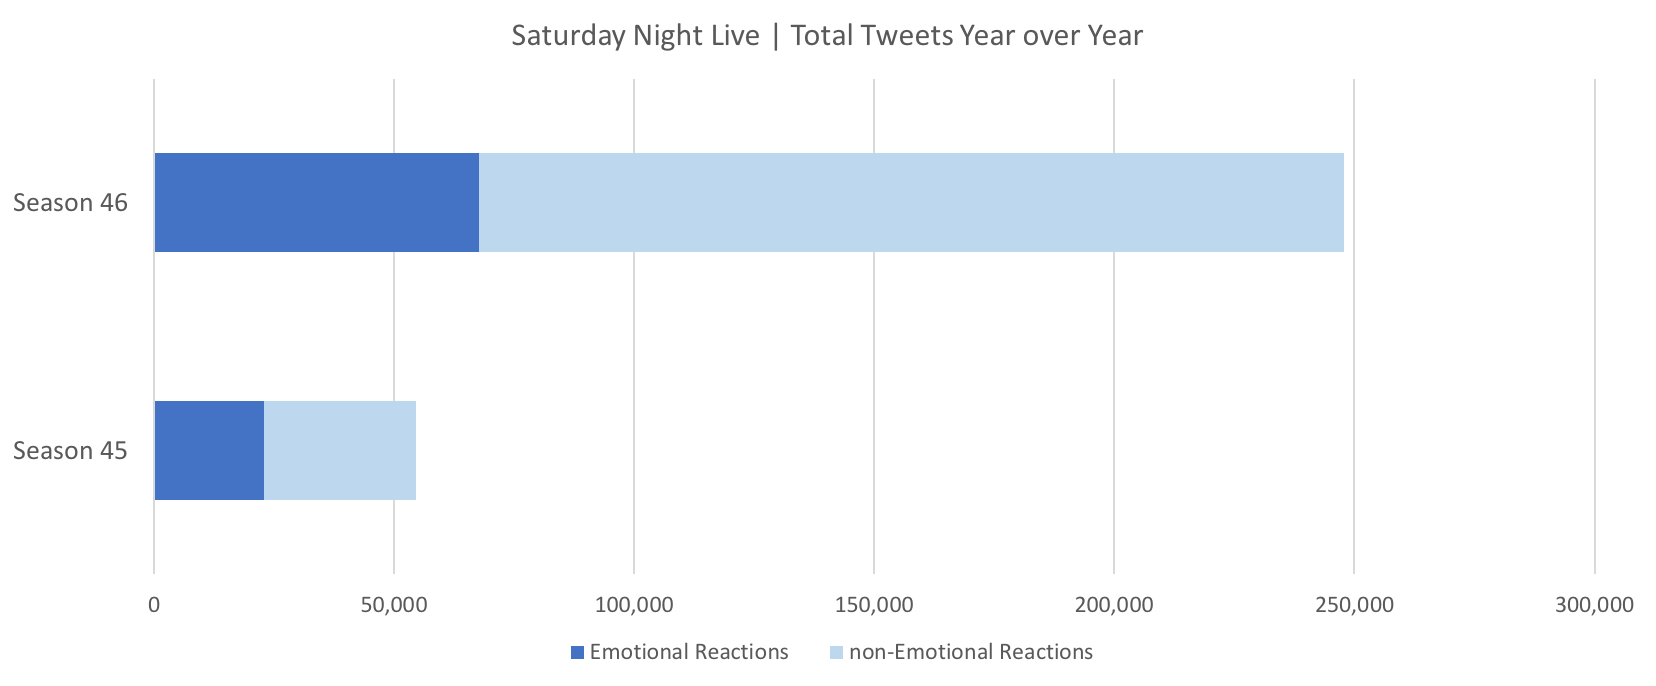 Source: Canvs Compare, Total Tweets in Weekend of Saturday Night Live premiere